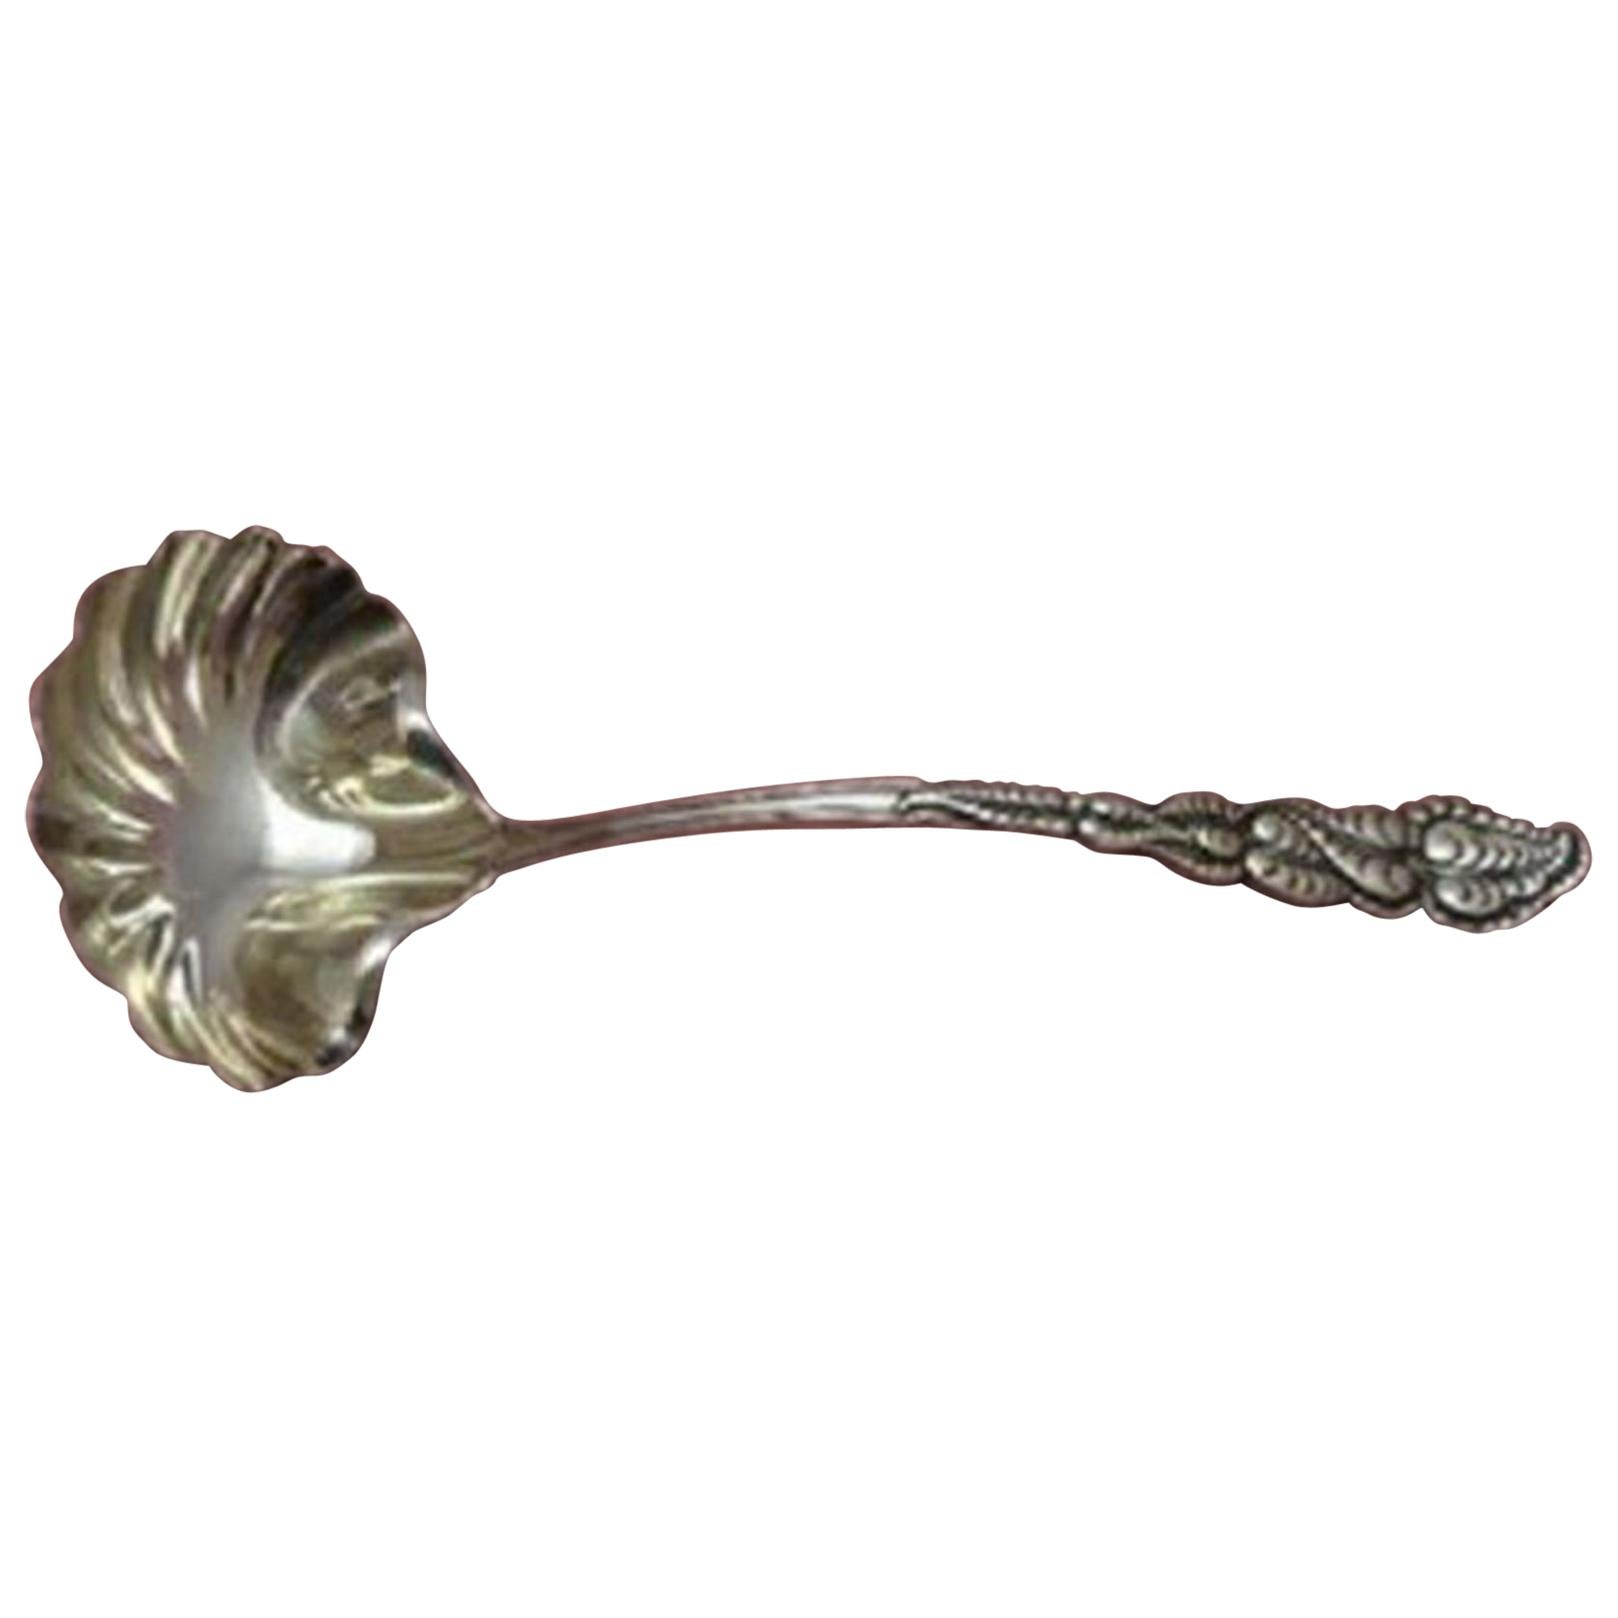 Ailanthus by Tiffany & Co Sterling Silver Soup Ladle Serving